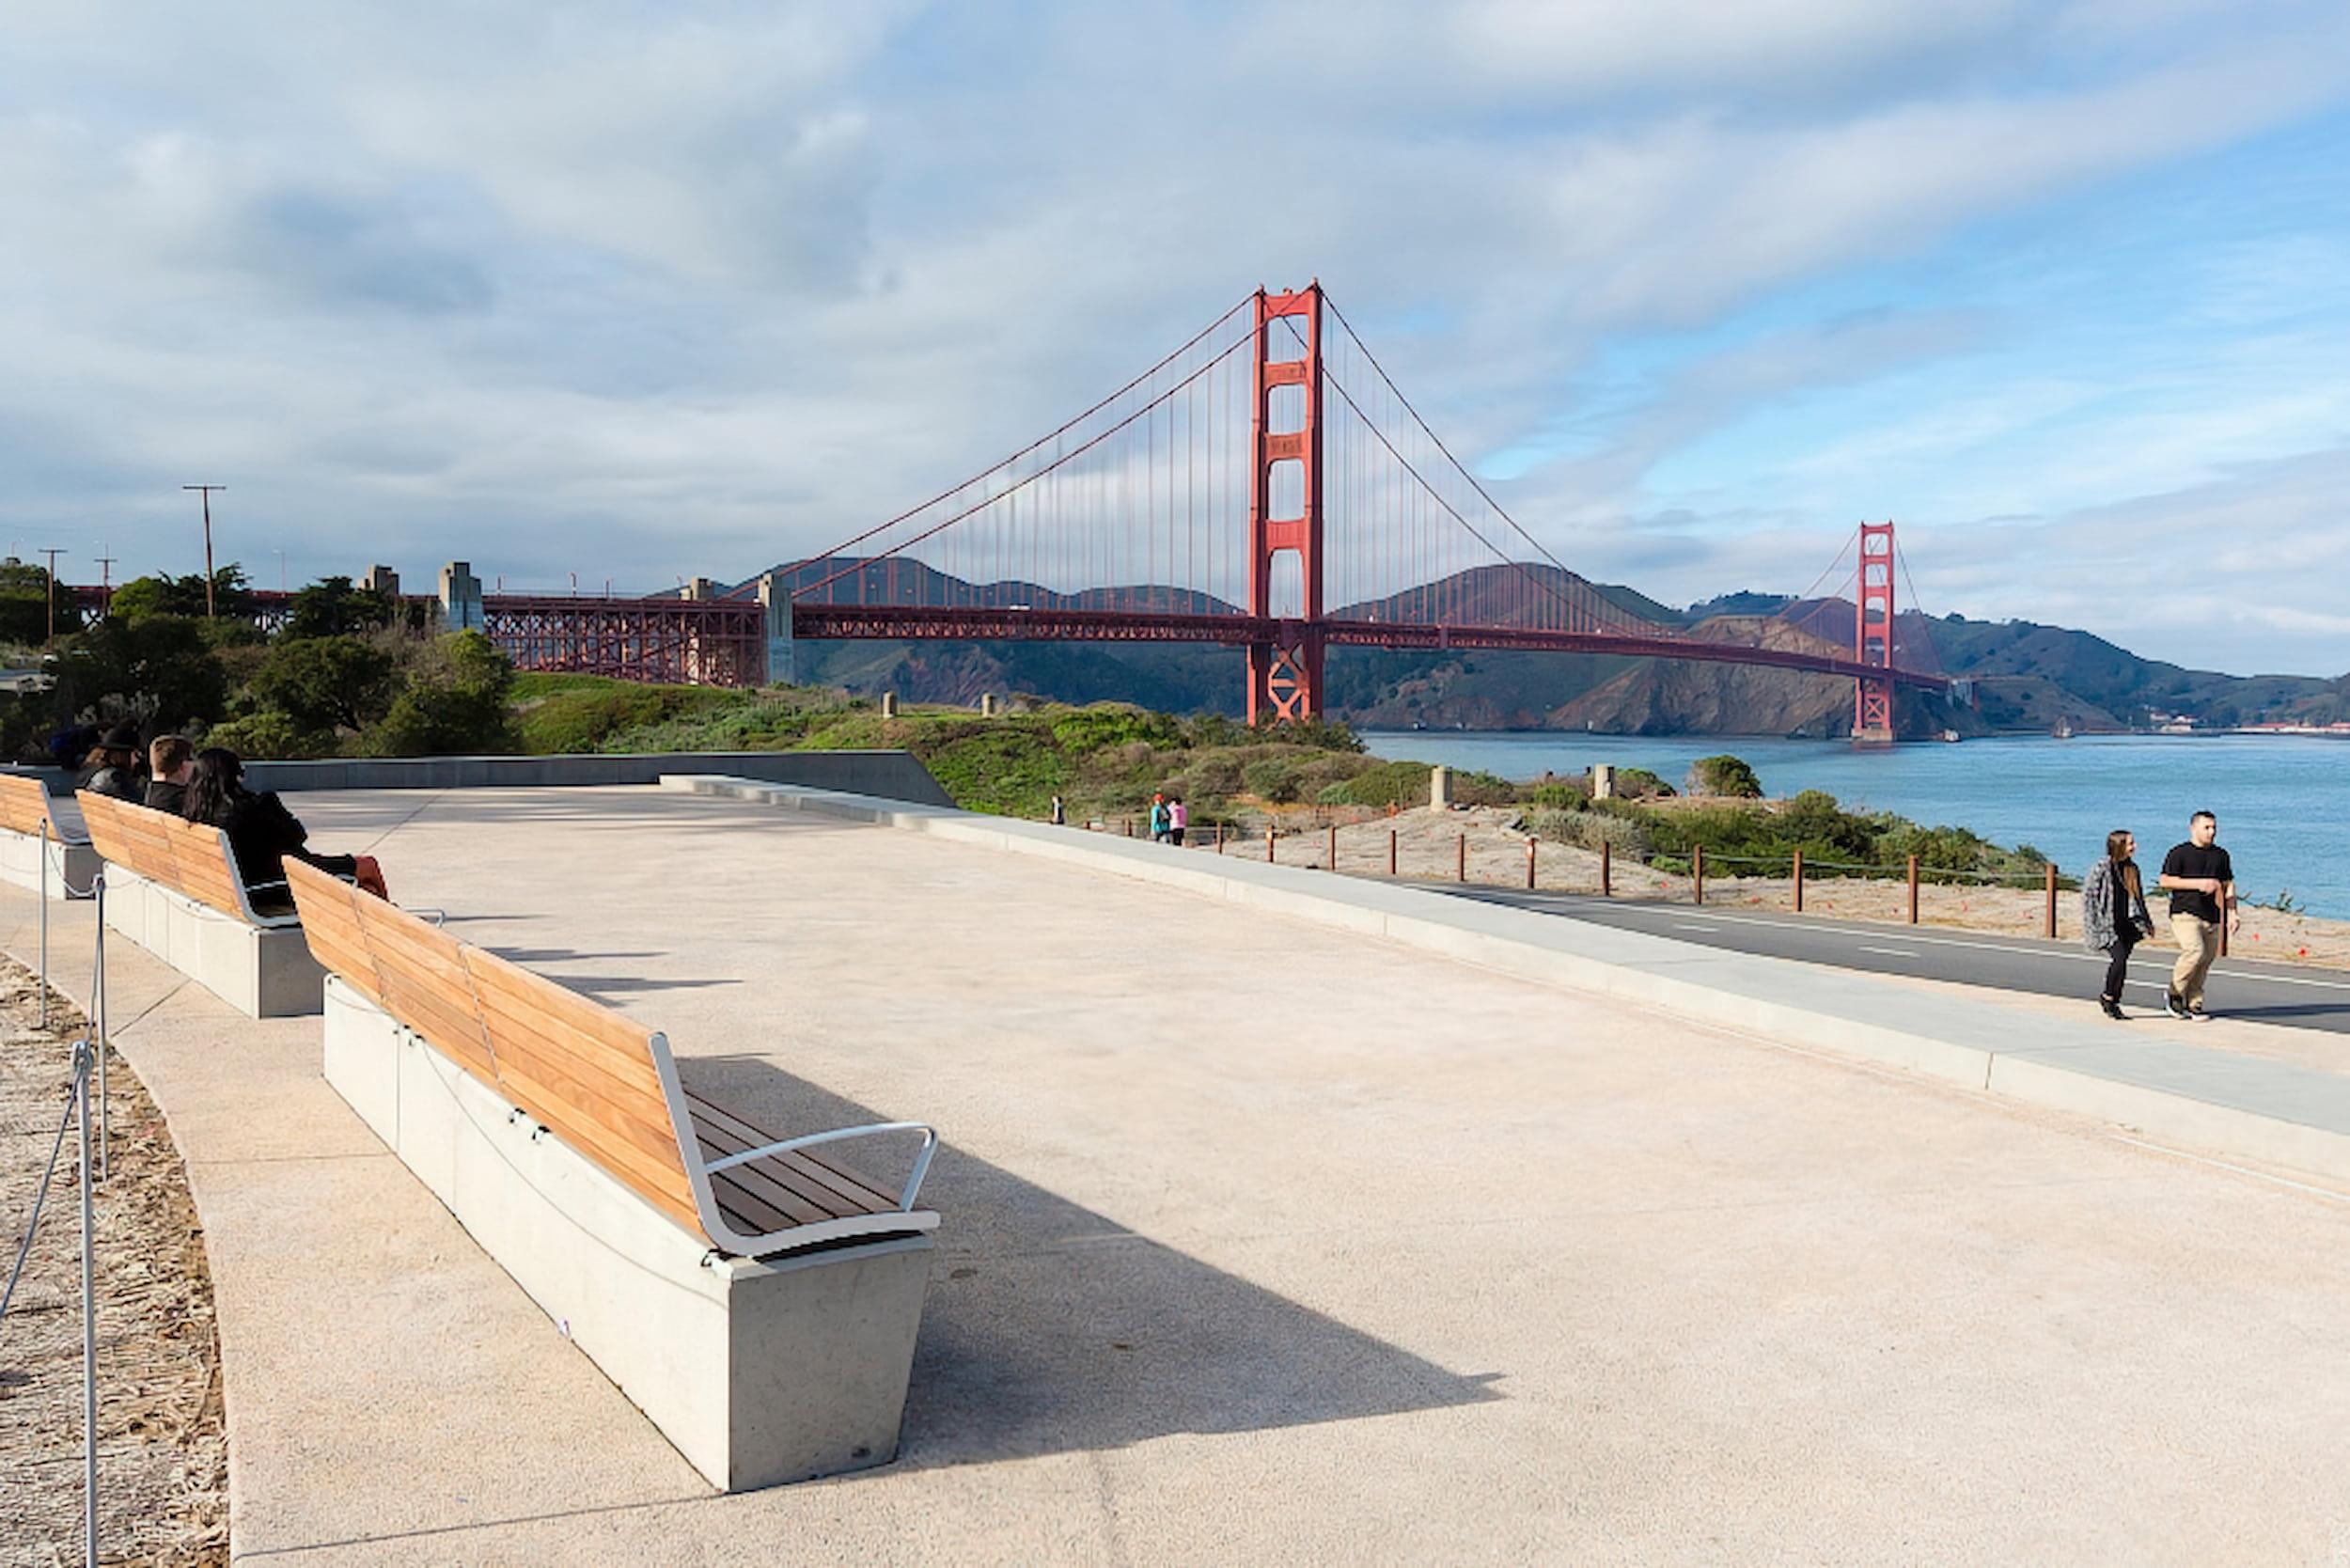 Battery East Overlook with the Golden Gate Bridge in the background. Photo by Charity Vargas.